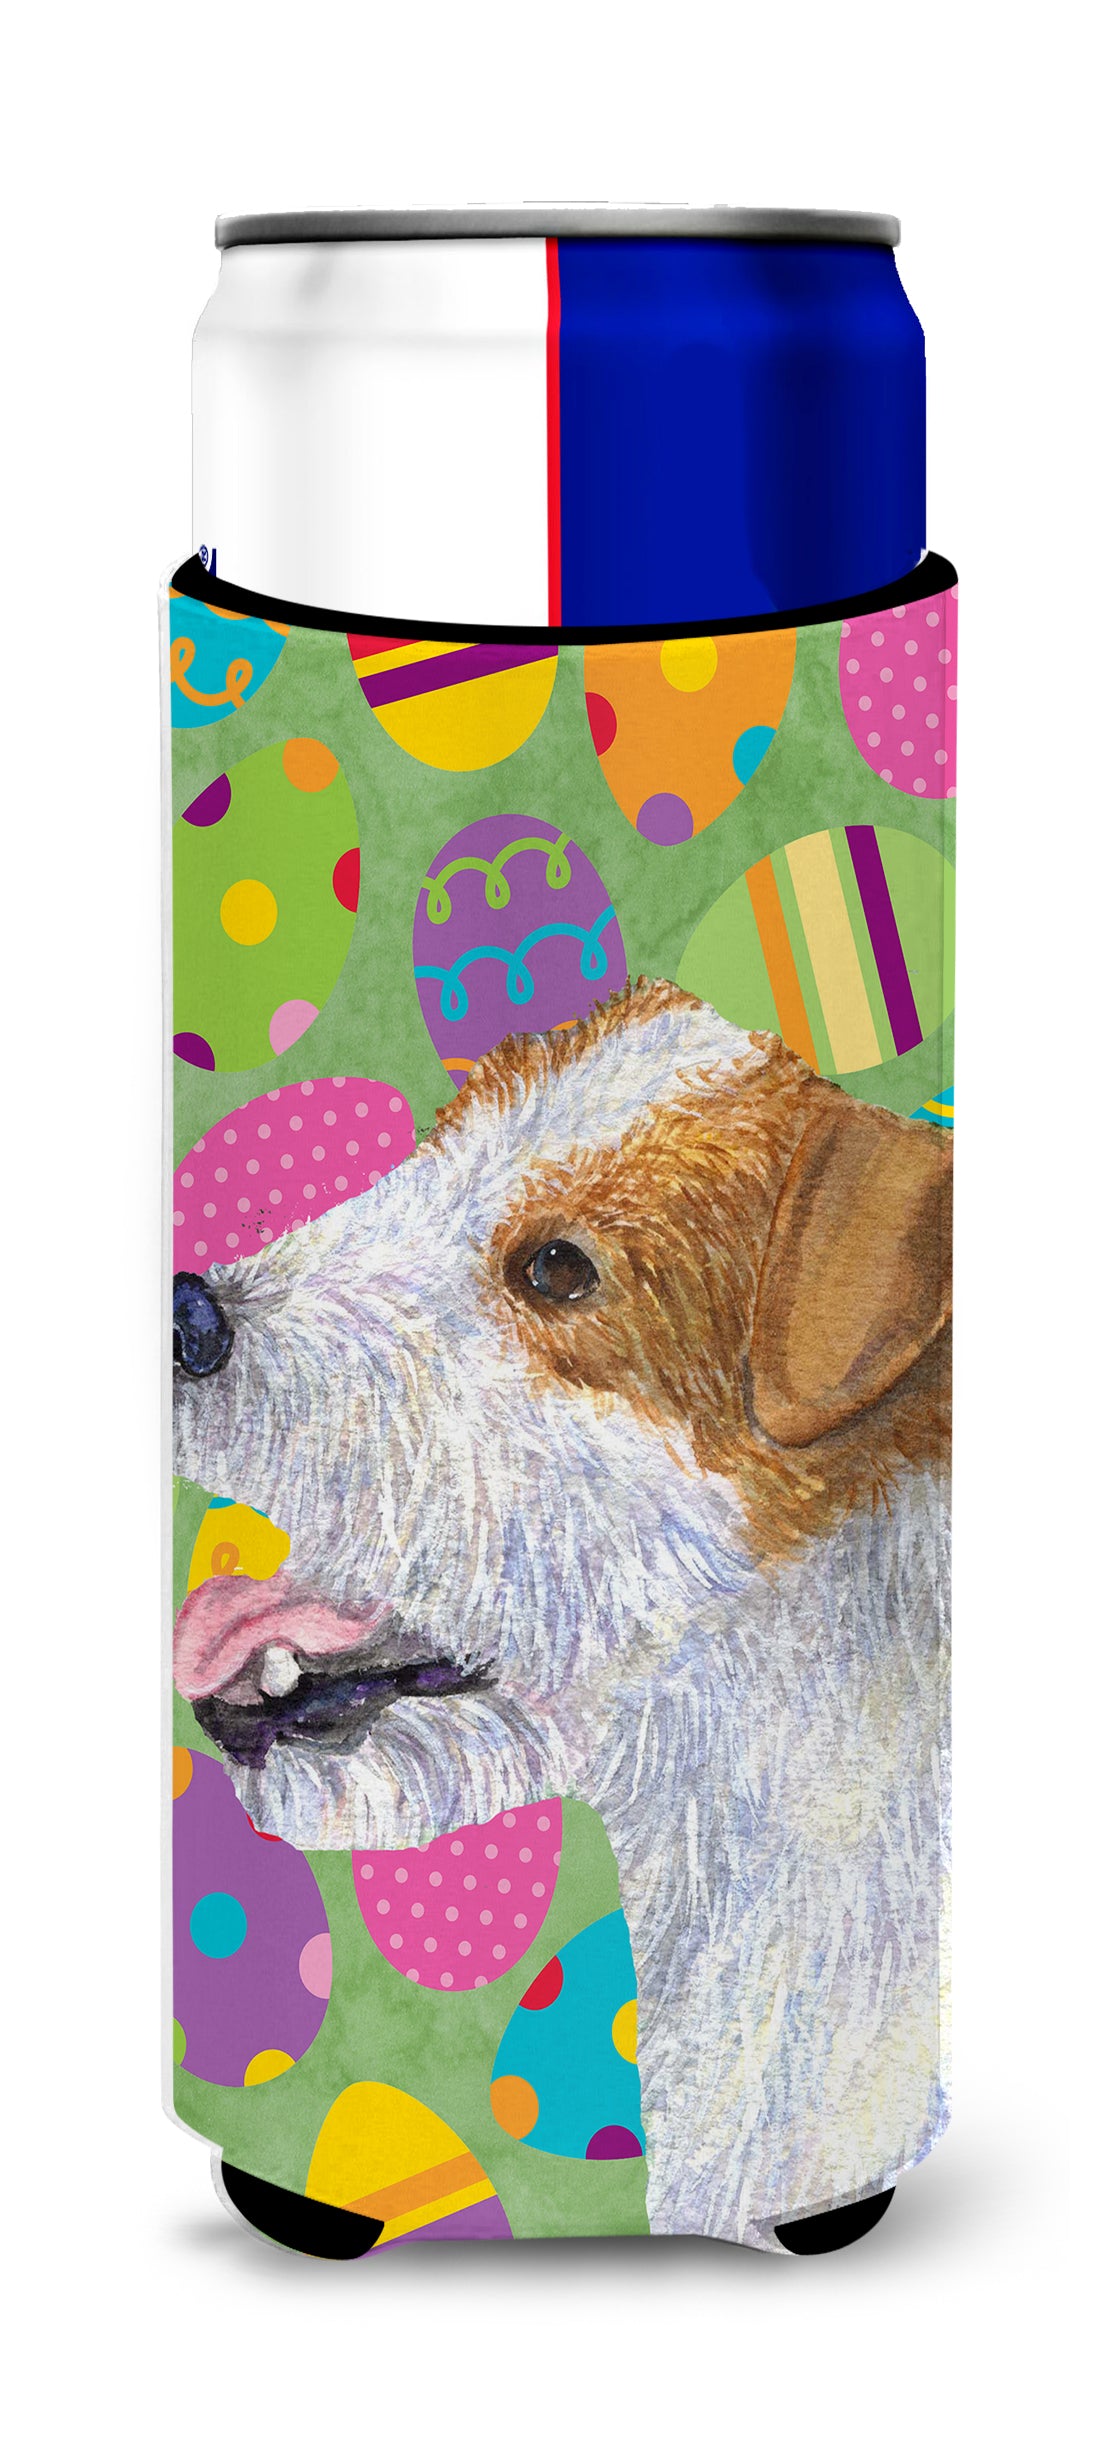 Jack Russell Terrier Easter Eggtravaganza Ultra Beverage Insulators for slim cans SS4849MUK.